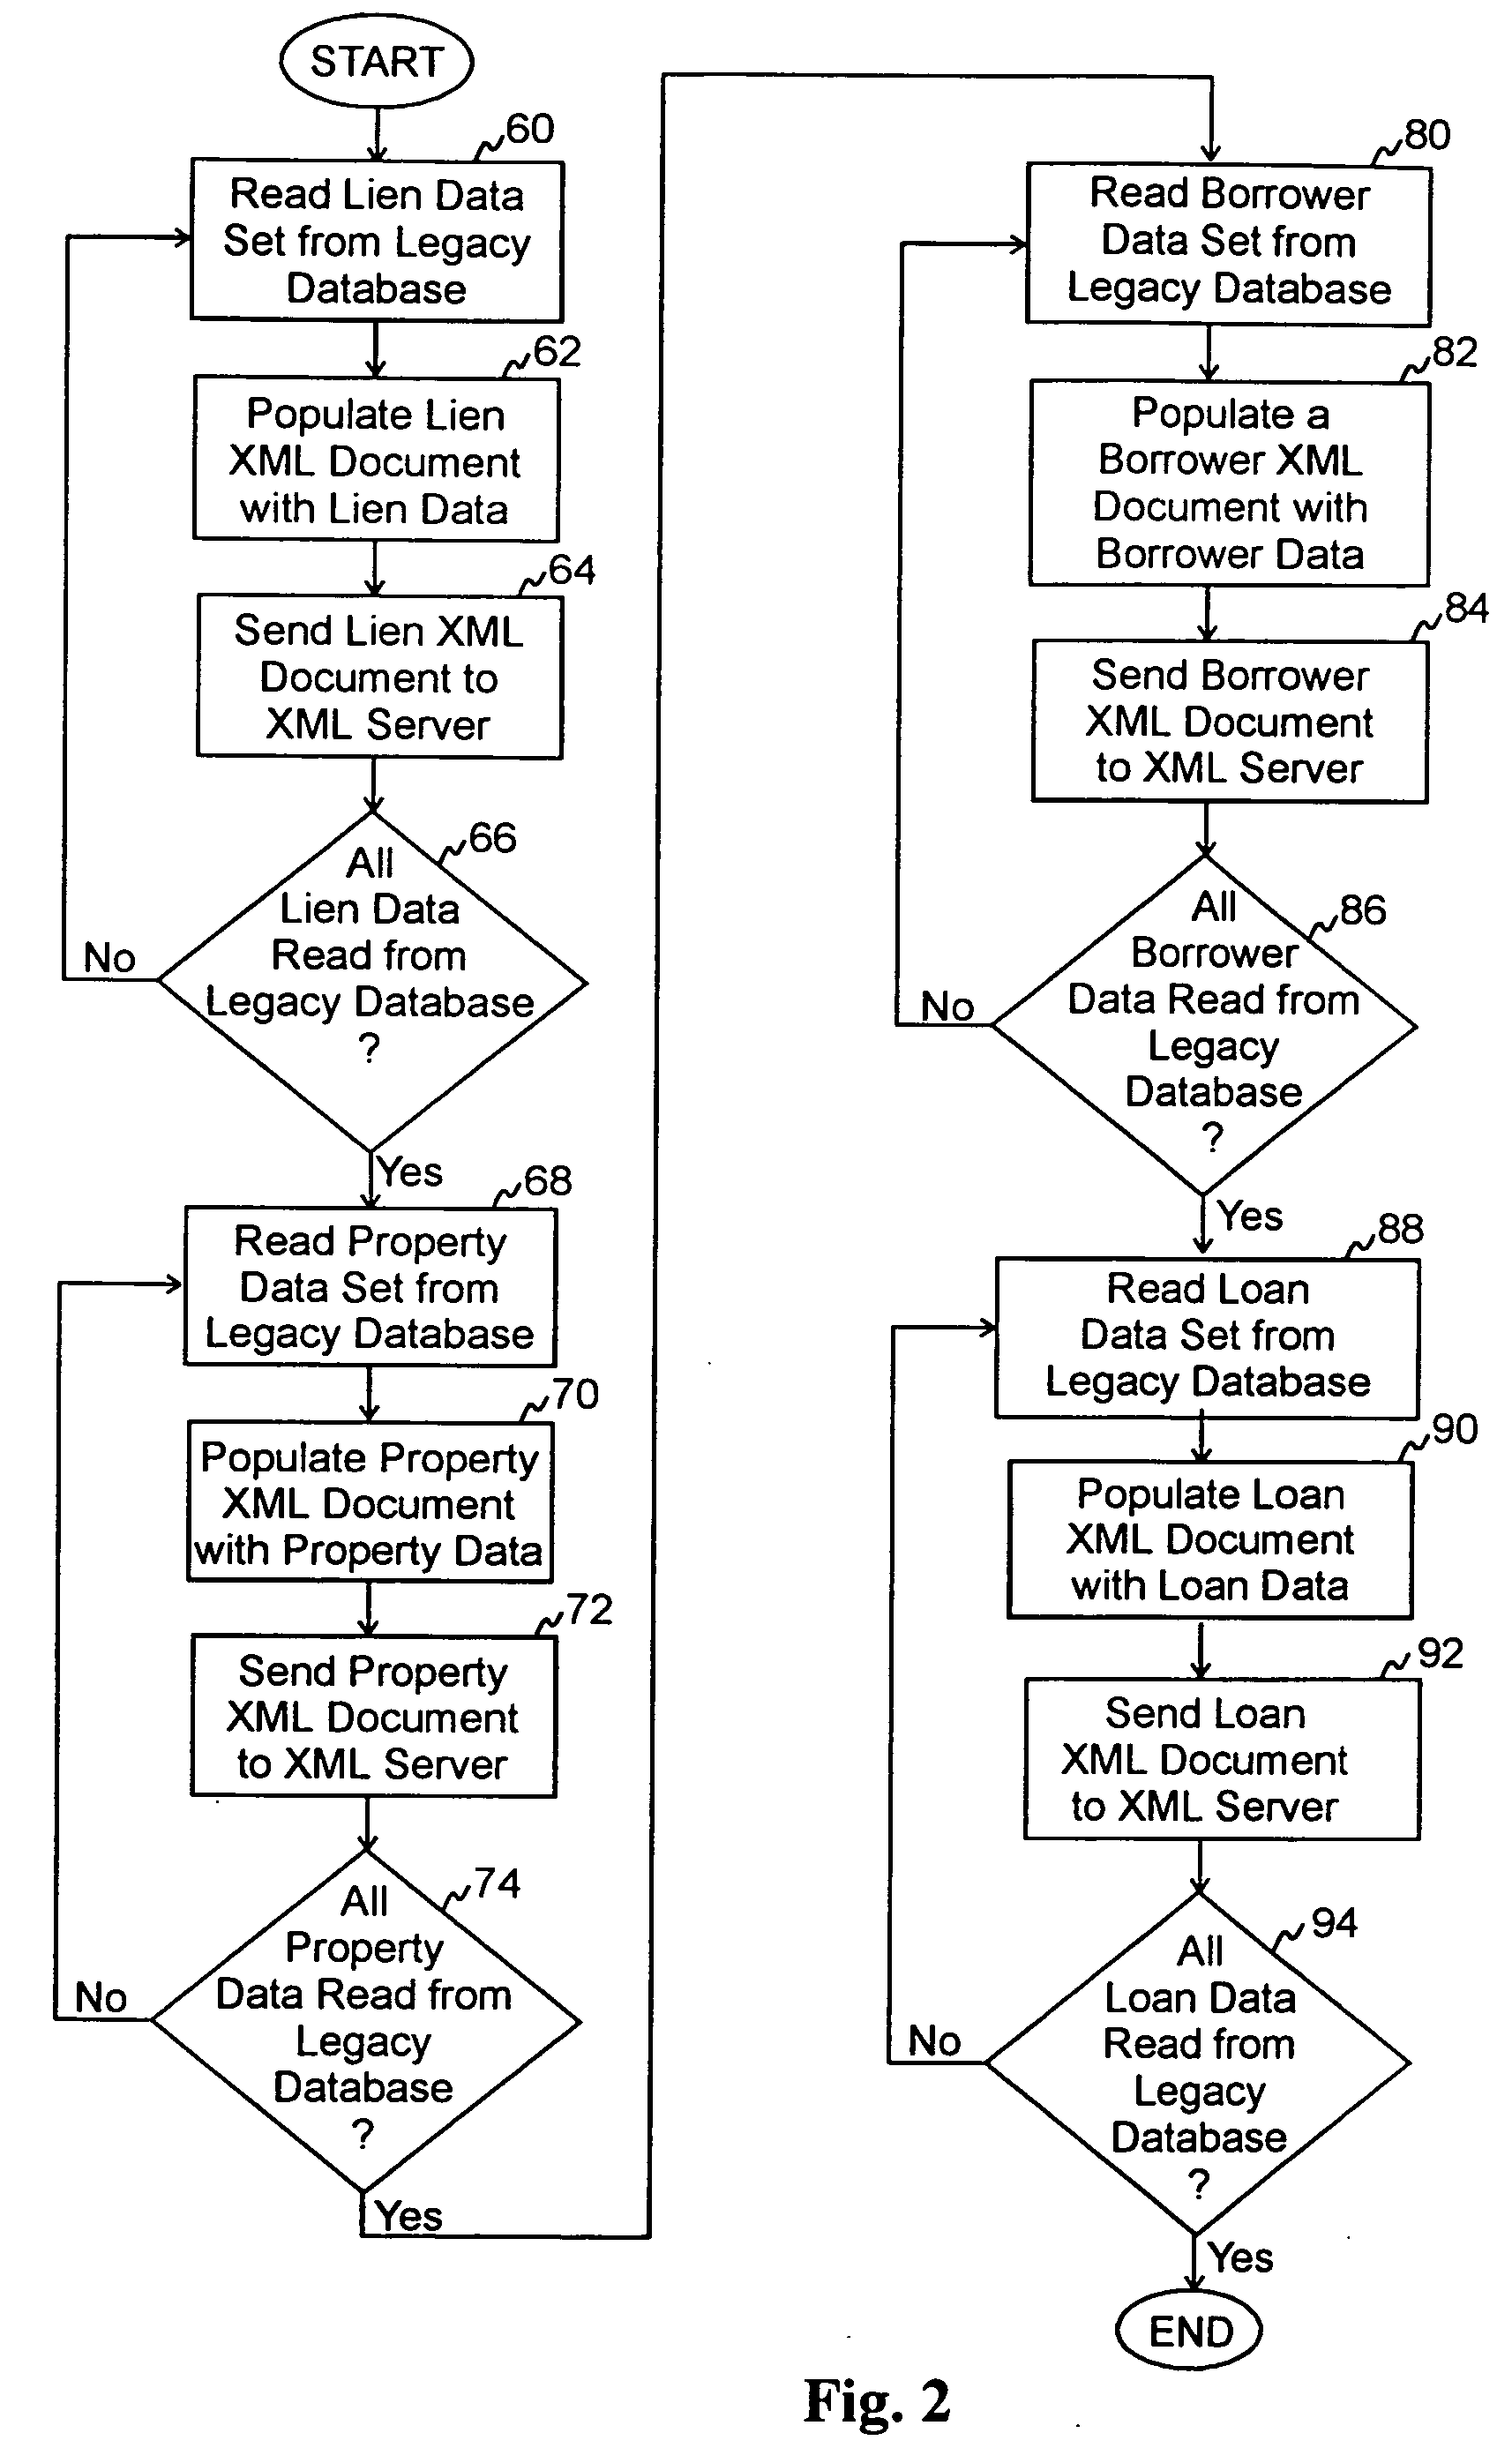 Management and reporting system and process for use with multiple disparate databases